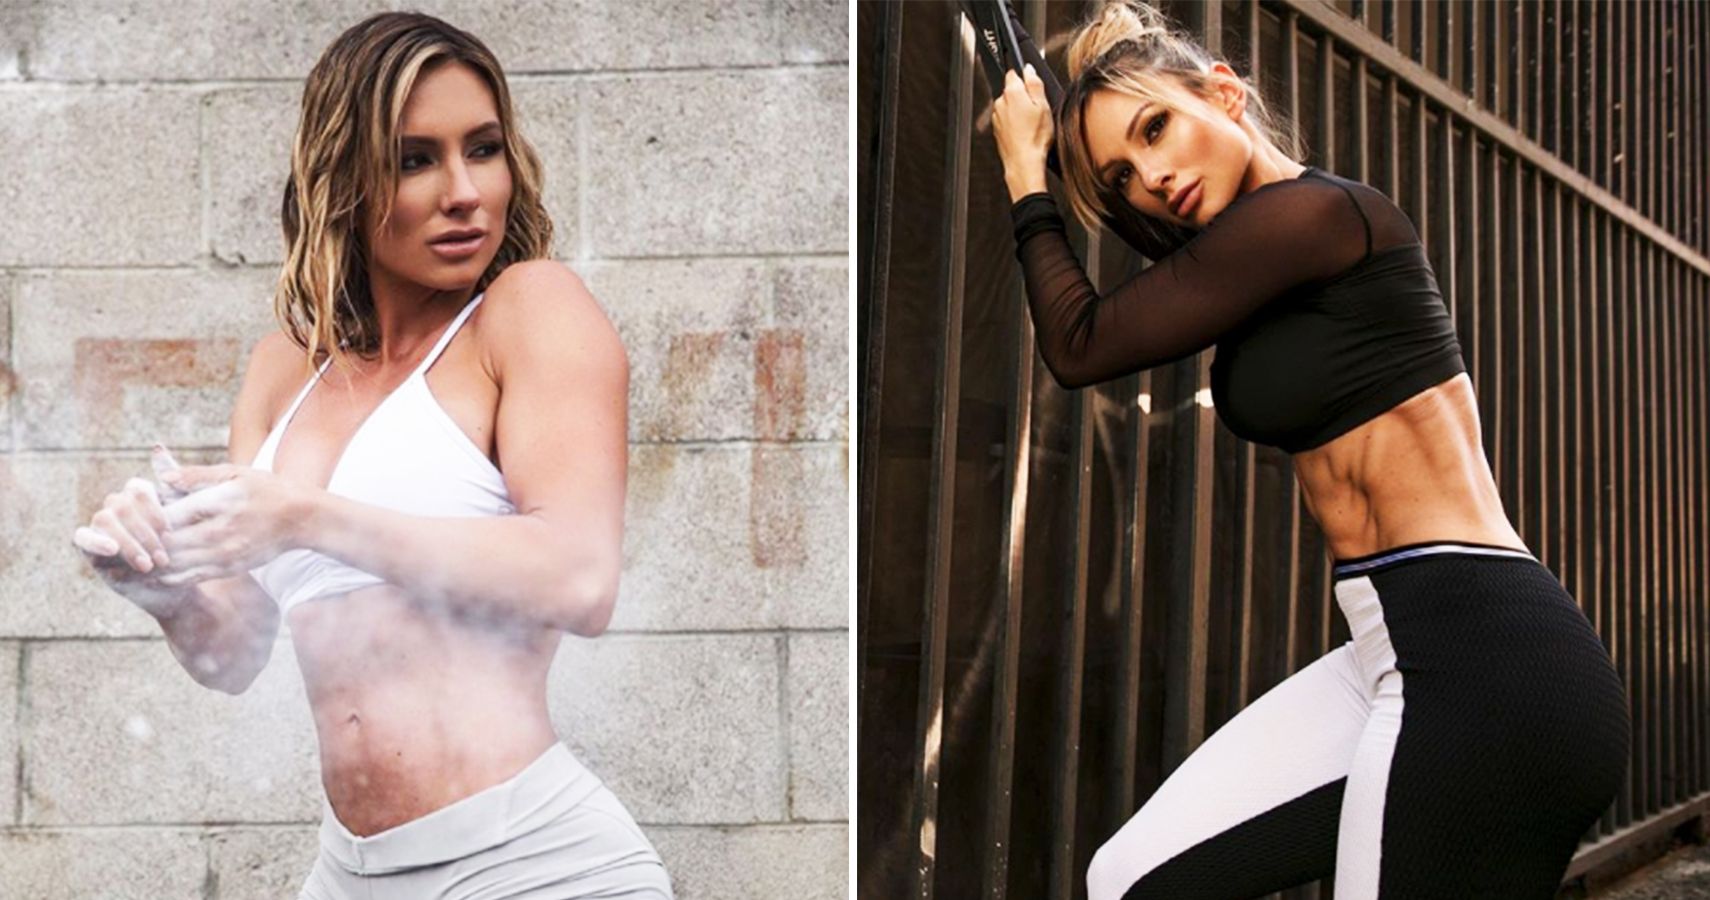 Photoshoot paige hathaway 15 Fit